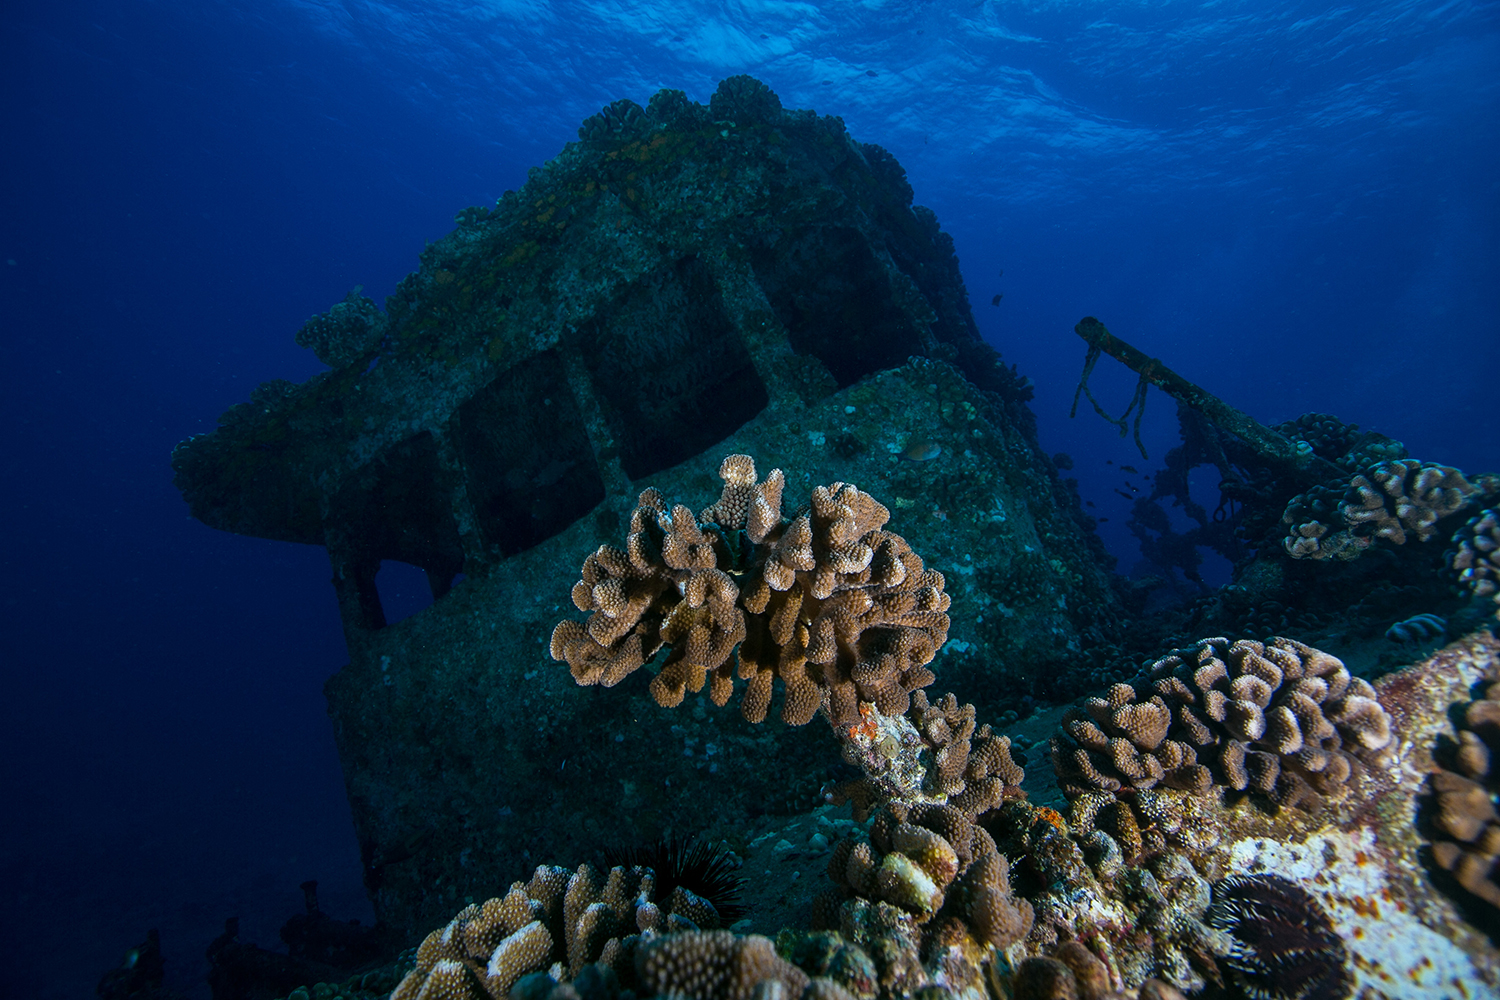 The USS Nashua, aka the Navy Tug, which is among the best wreck diving on Oahu, Hawaii